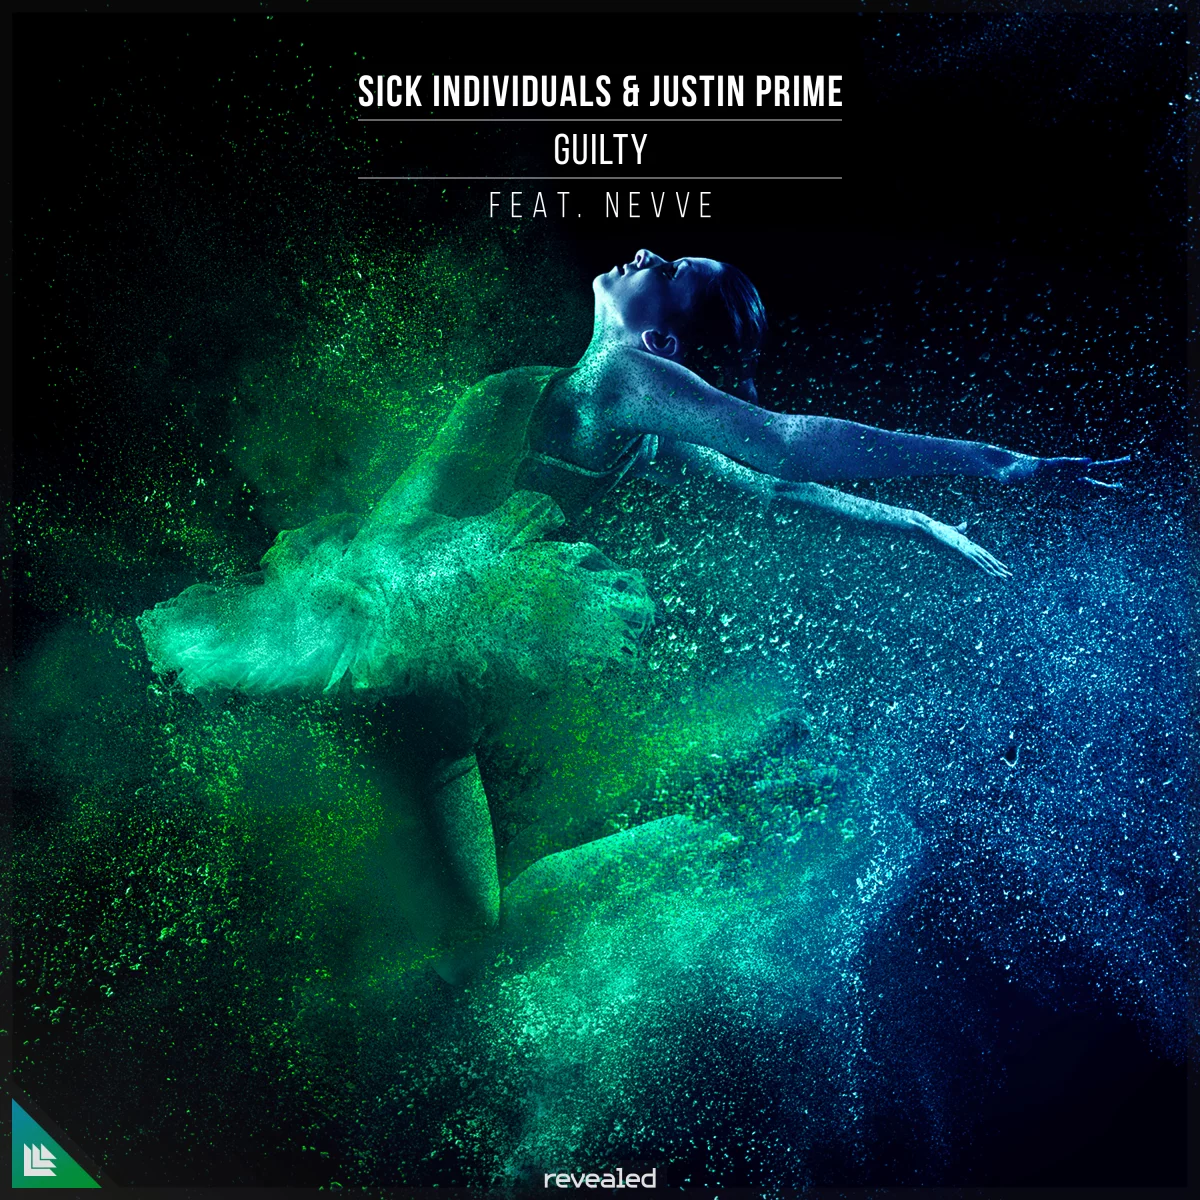 Guilty - Sick Individuals⁠ & Justin Prime⁠ ⁠ feat. Nevve